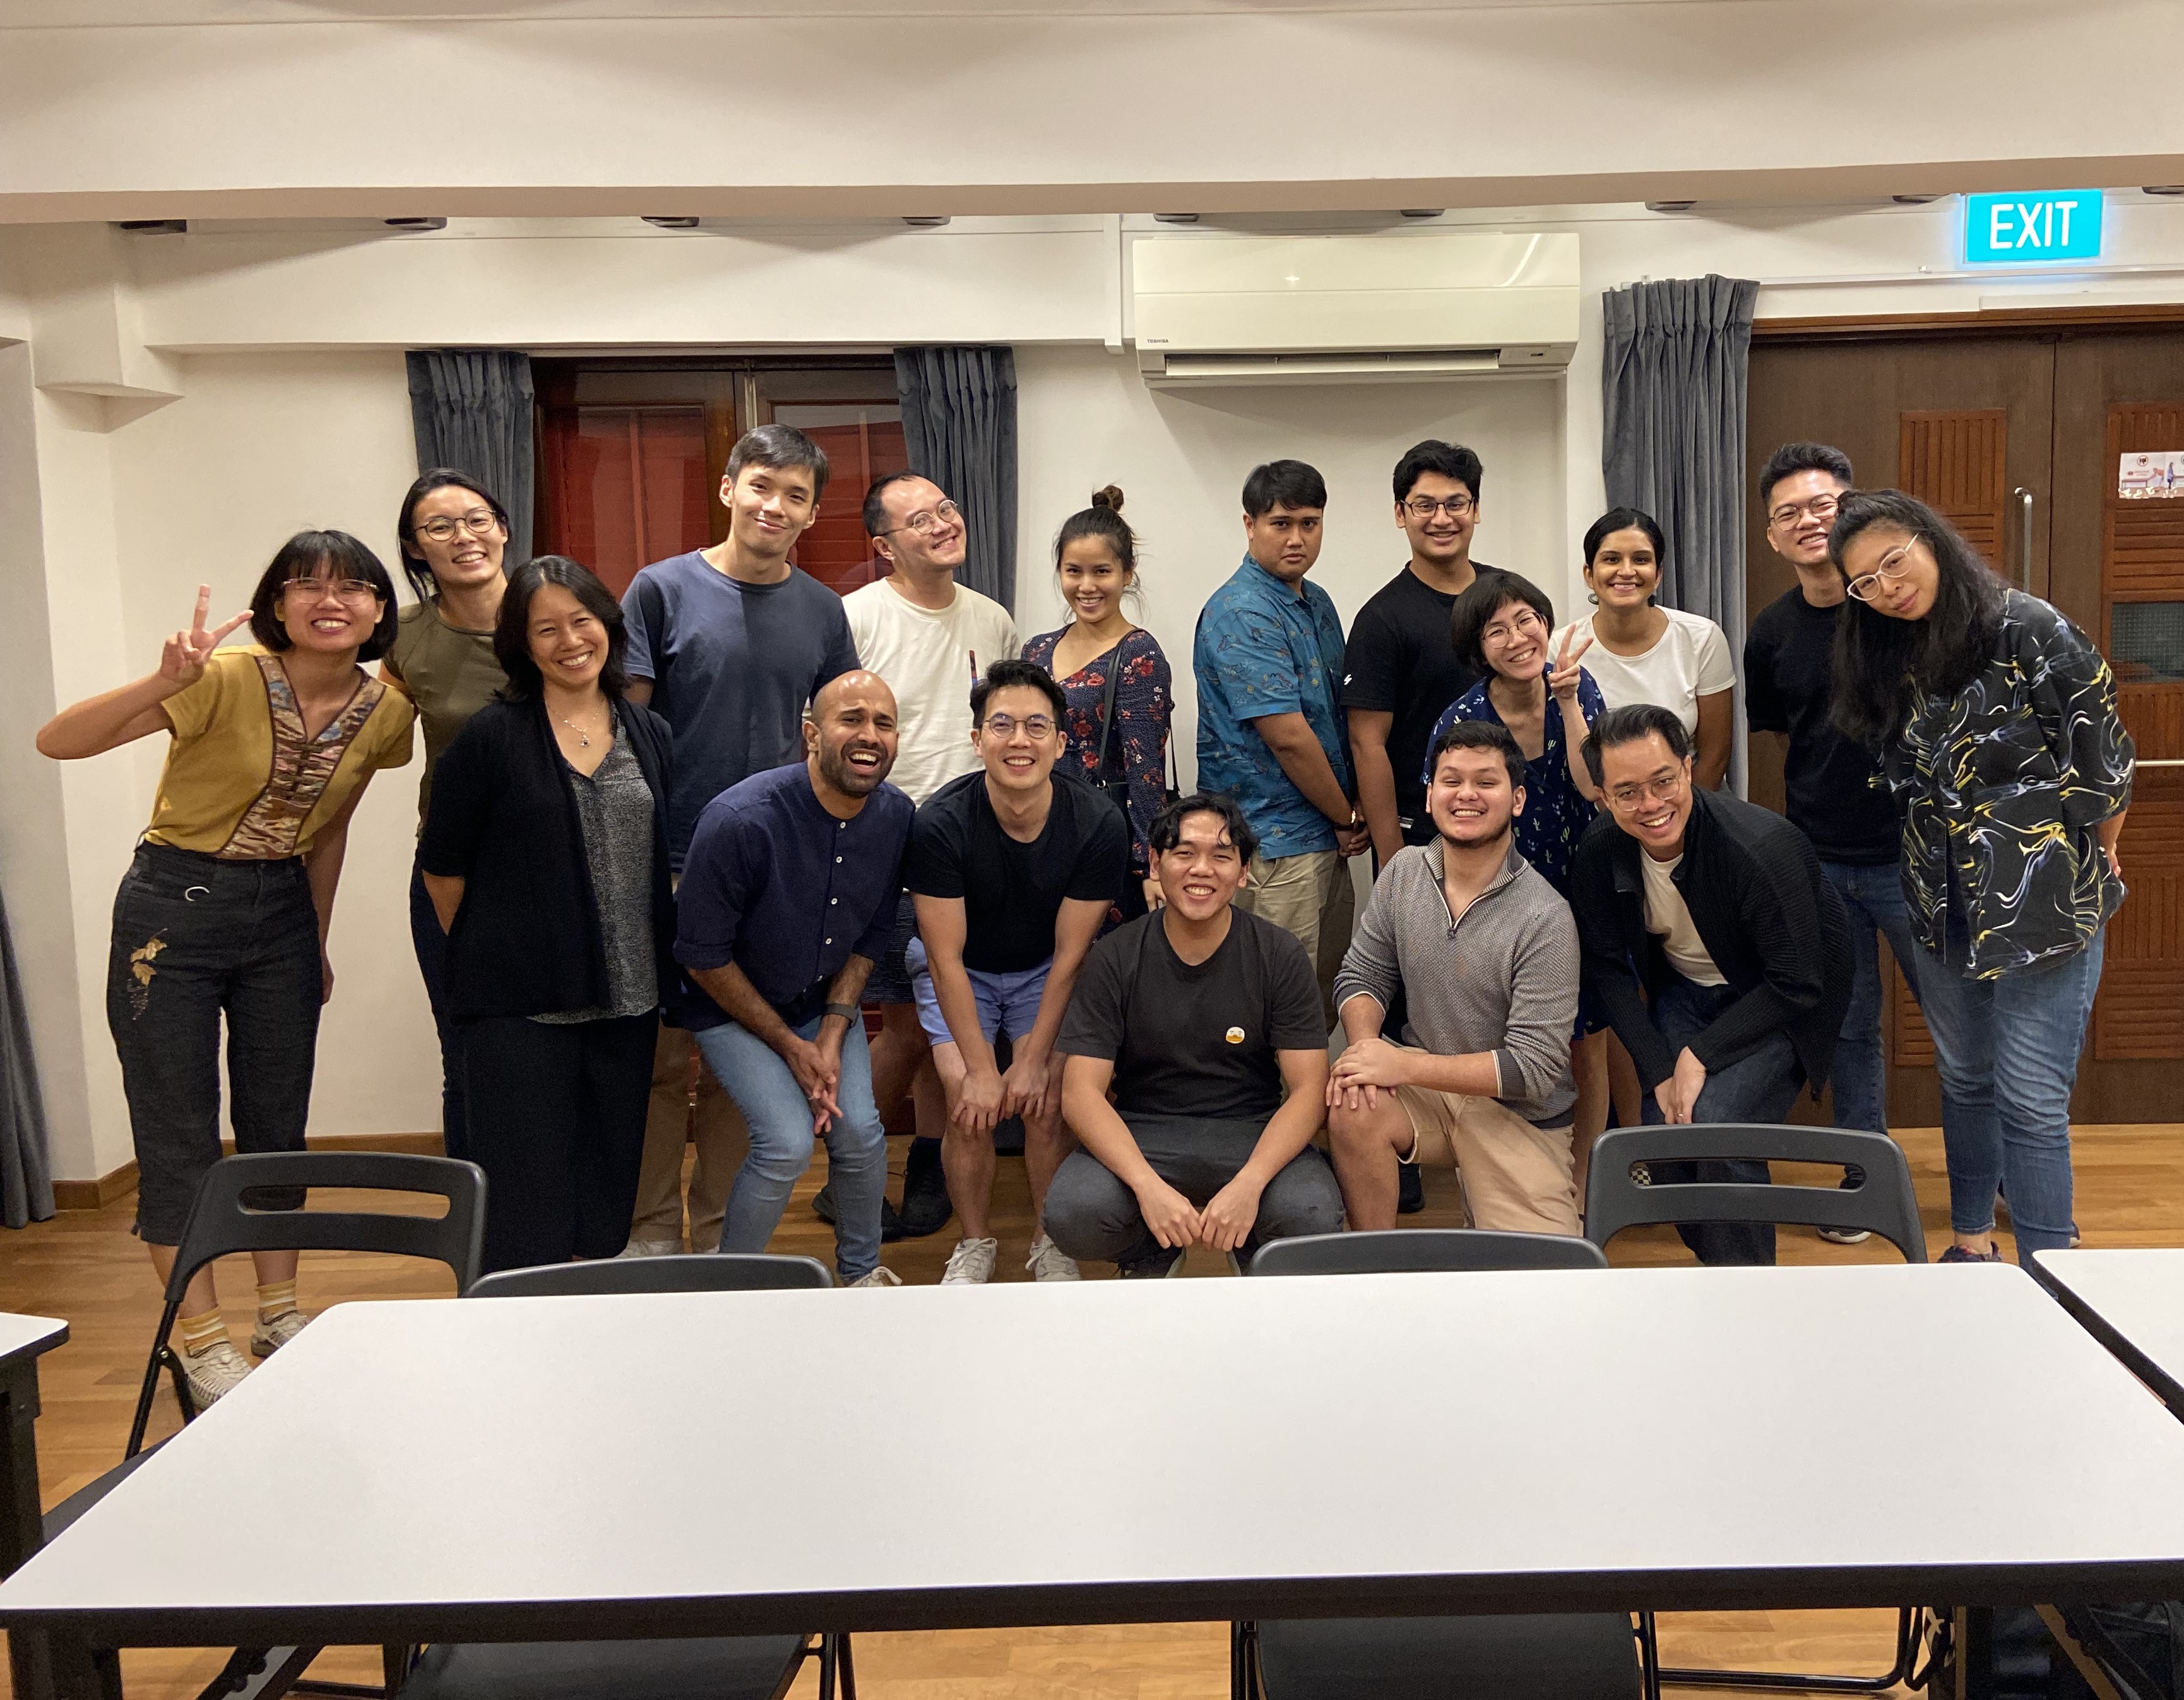 Photo with the table-read group. From L-R: (Row 1) Juliet, Shridar, Shou Chen, Marwyn, Christopher and Lucas (Row 2) Jaclyn, Yanling, Chee Yew, Joel, Rachel, Riqi, Rohan, Gua Khee, Sindhu, Eugene and Cherilyn